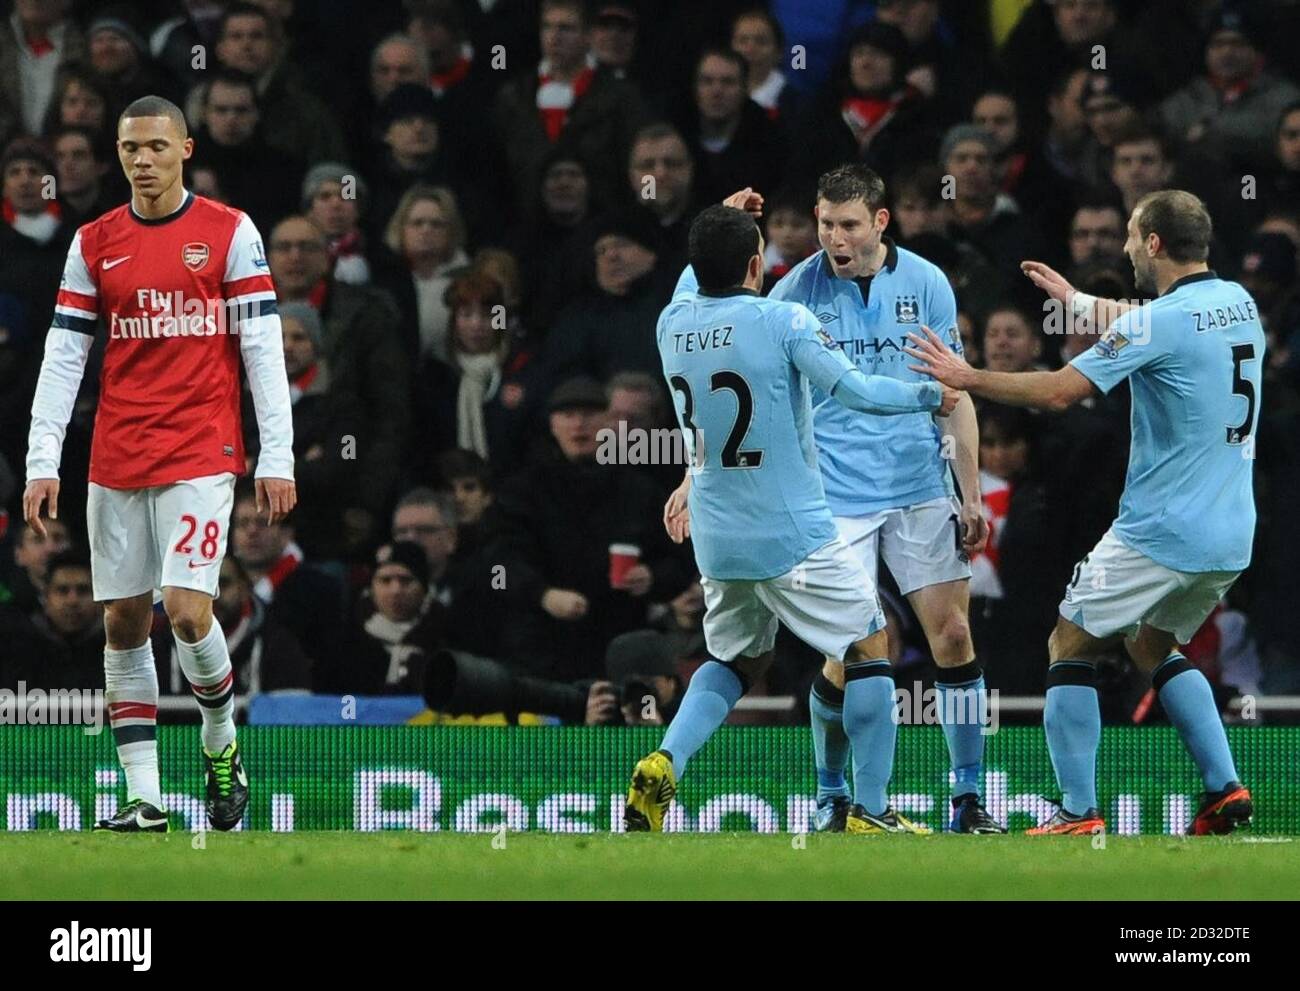 Manchester City's James Milner (second right) celebrates after scoring his team's opening goal during the Barclays Premier League match at The Emirates Stadium, London. PRESS ASSOCATION Photo. Picture date: Sunday January 13, 2013. See PA story SOCCER Arsenal. Photo credit should read: Anthony Devlin/PA Wire. Stock Photo